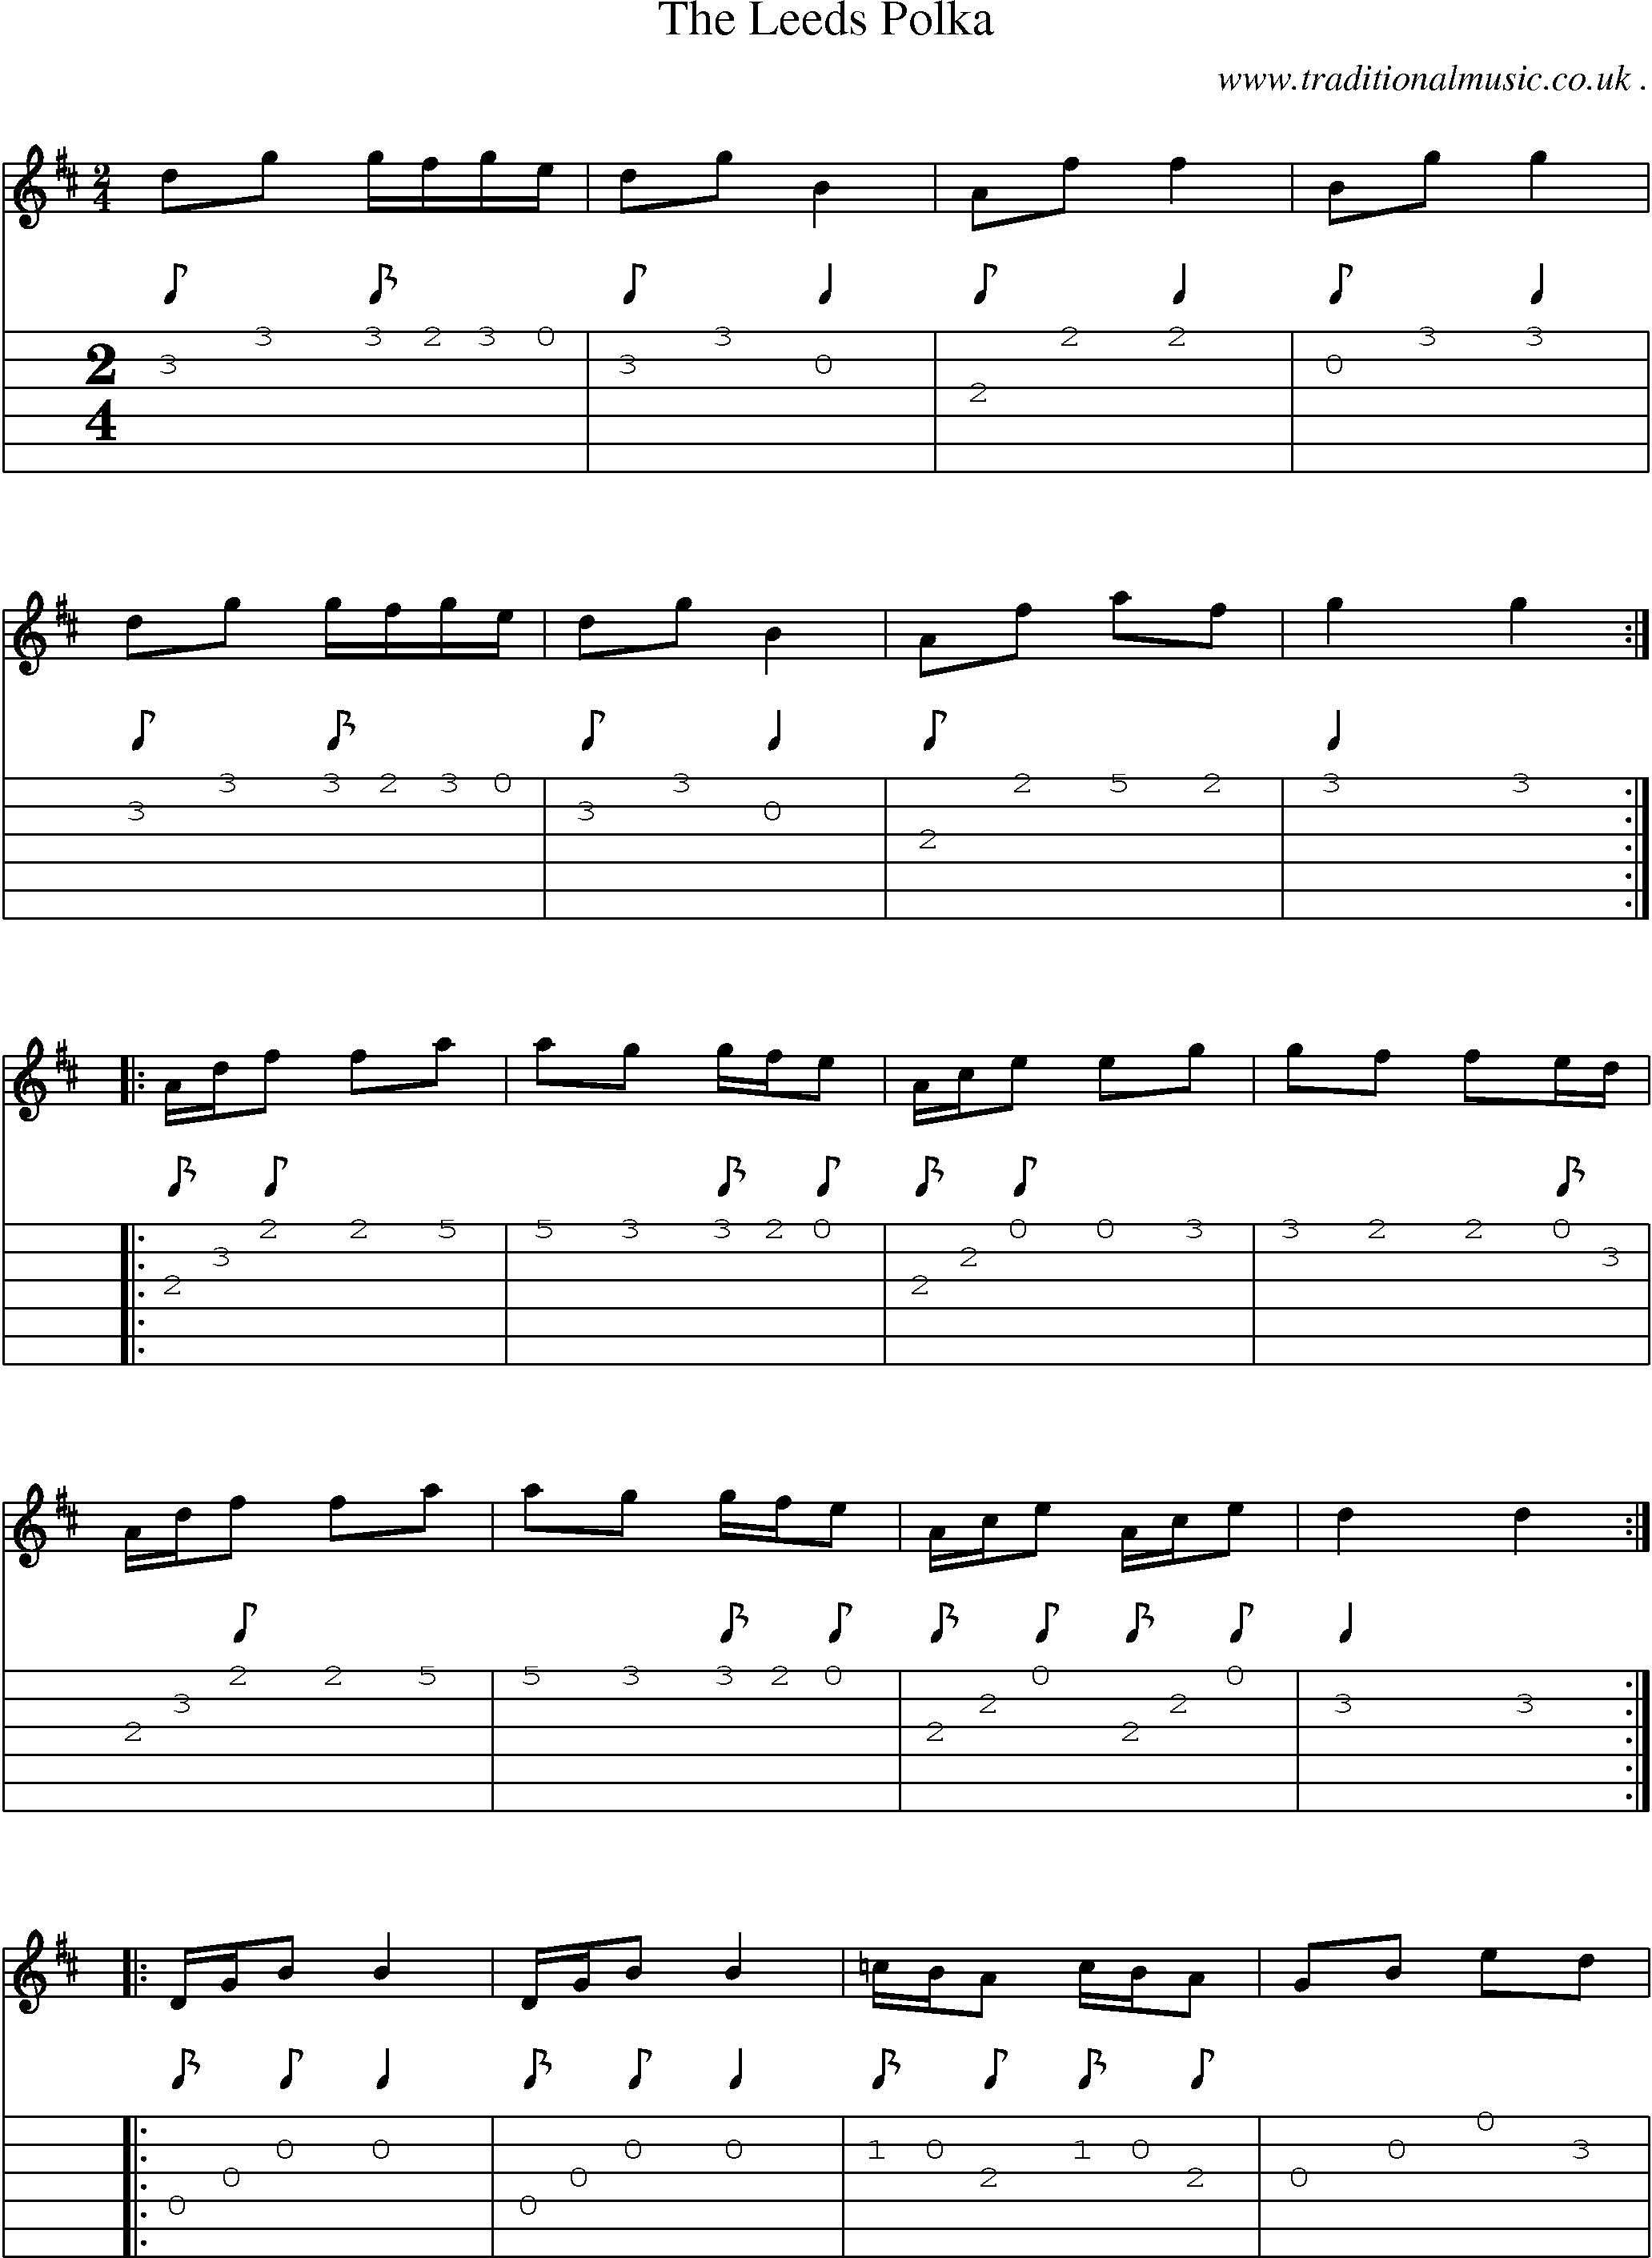 Sheet-Music and Guitar Tabs for The Leeds Polka